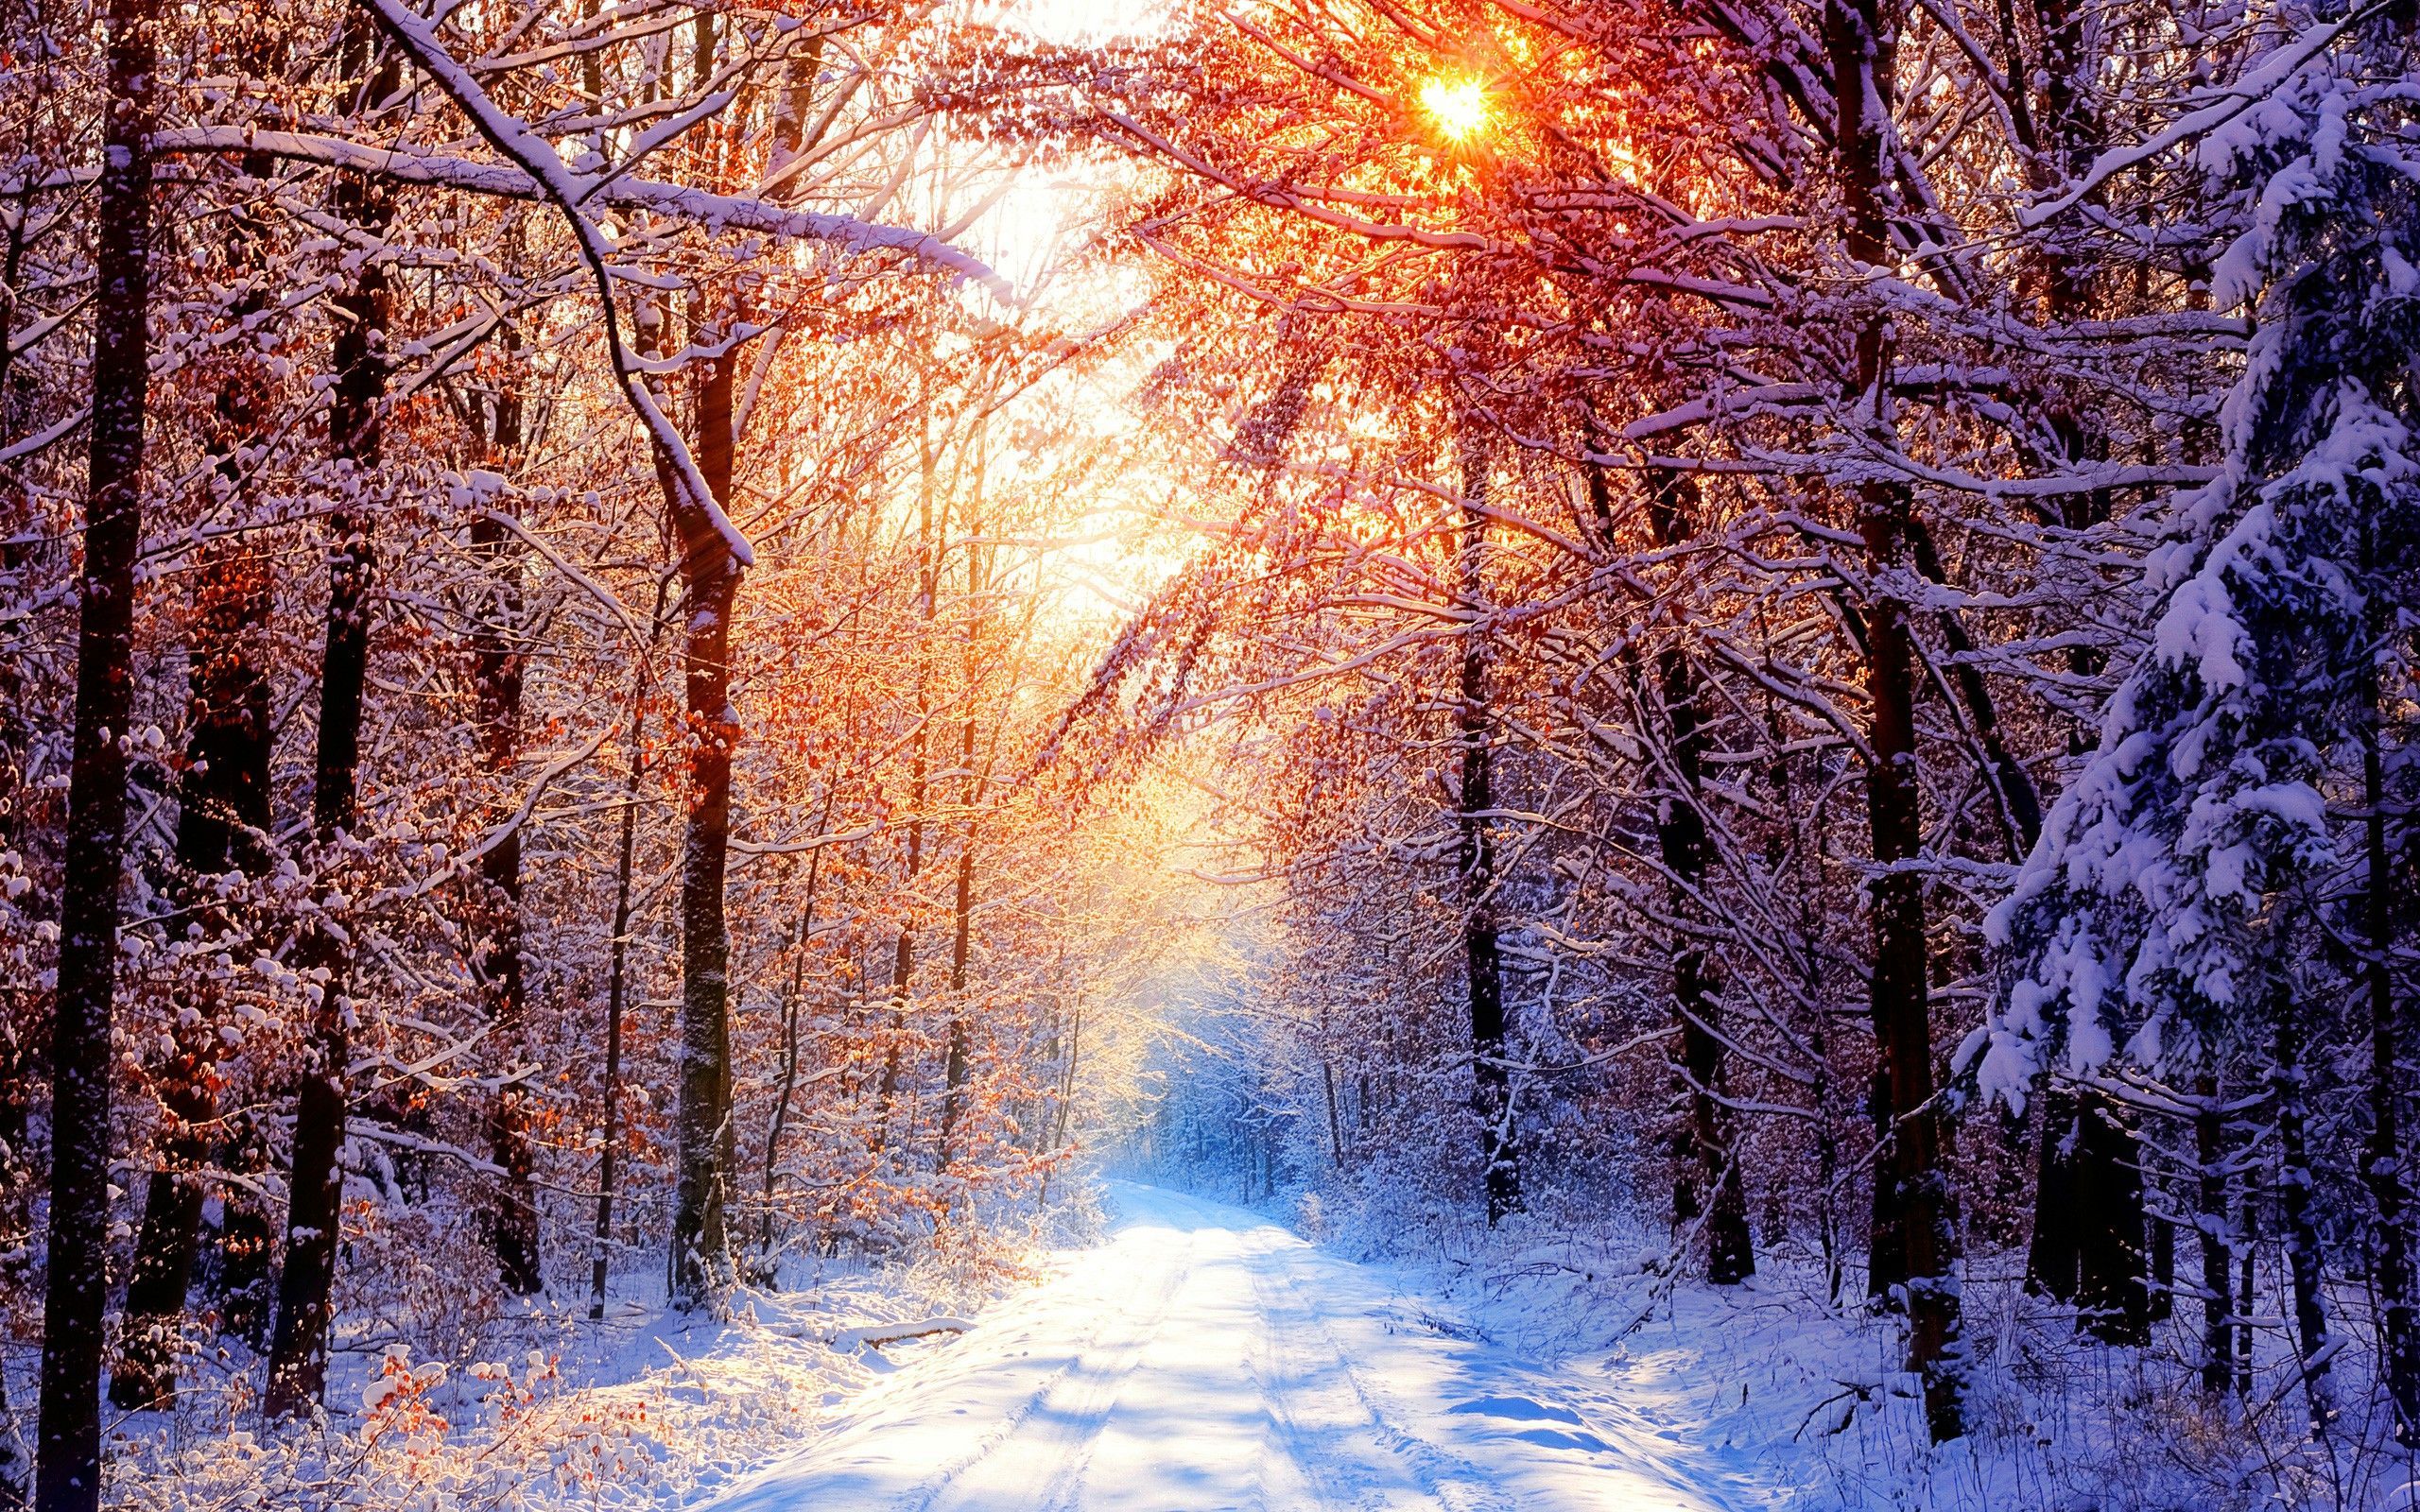 Check the best collection of Winter Desktop Wallpaper